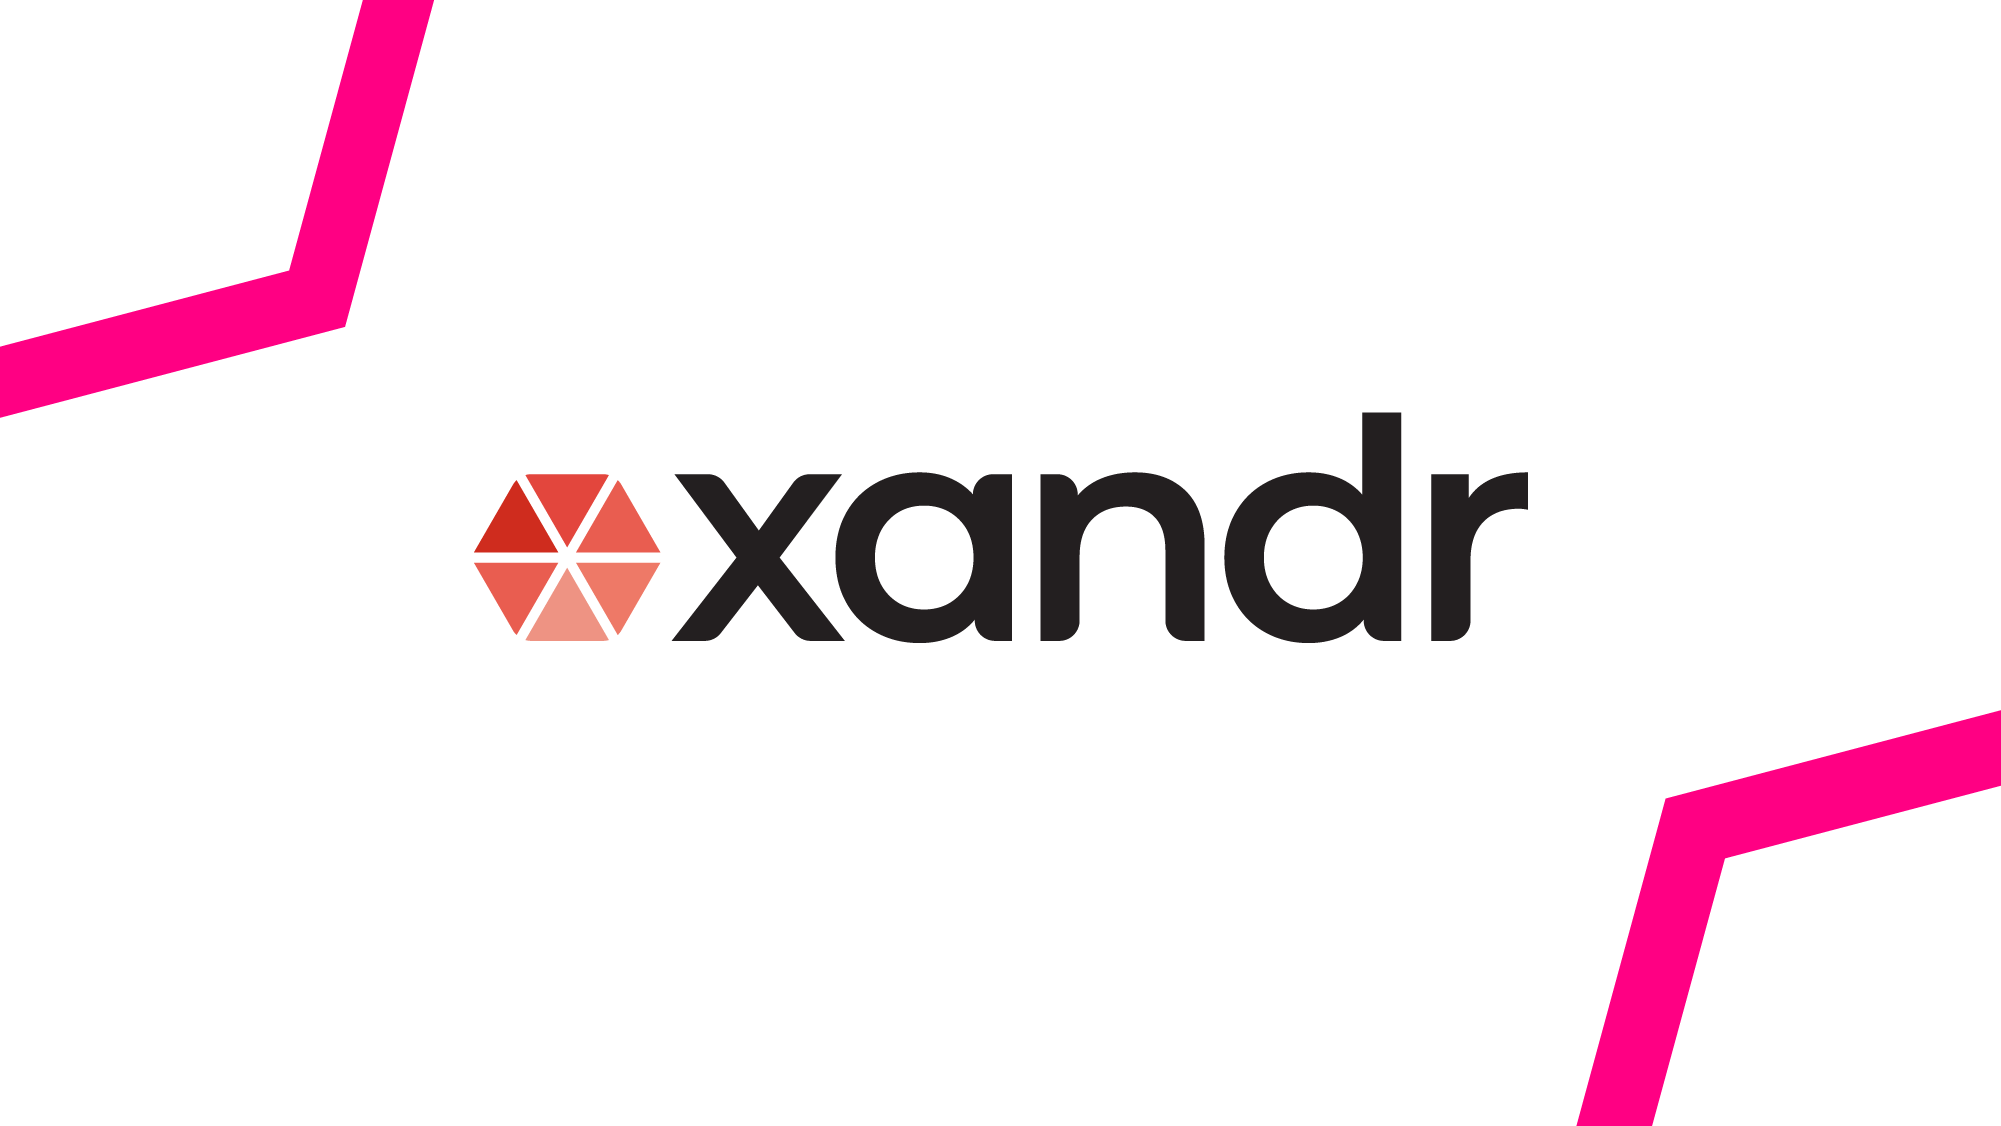 The alliance will enable Xandr Invest advertisers to programmatically purchase digital out of home (DOOH) inventory on a global scale via the Hivestack Supply Side Platform (SSP)